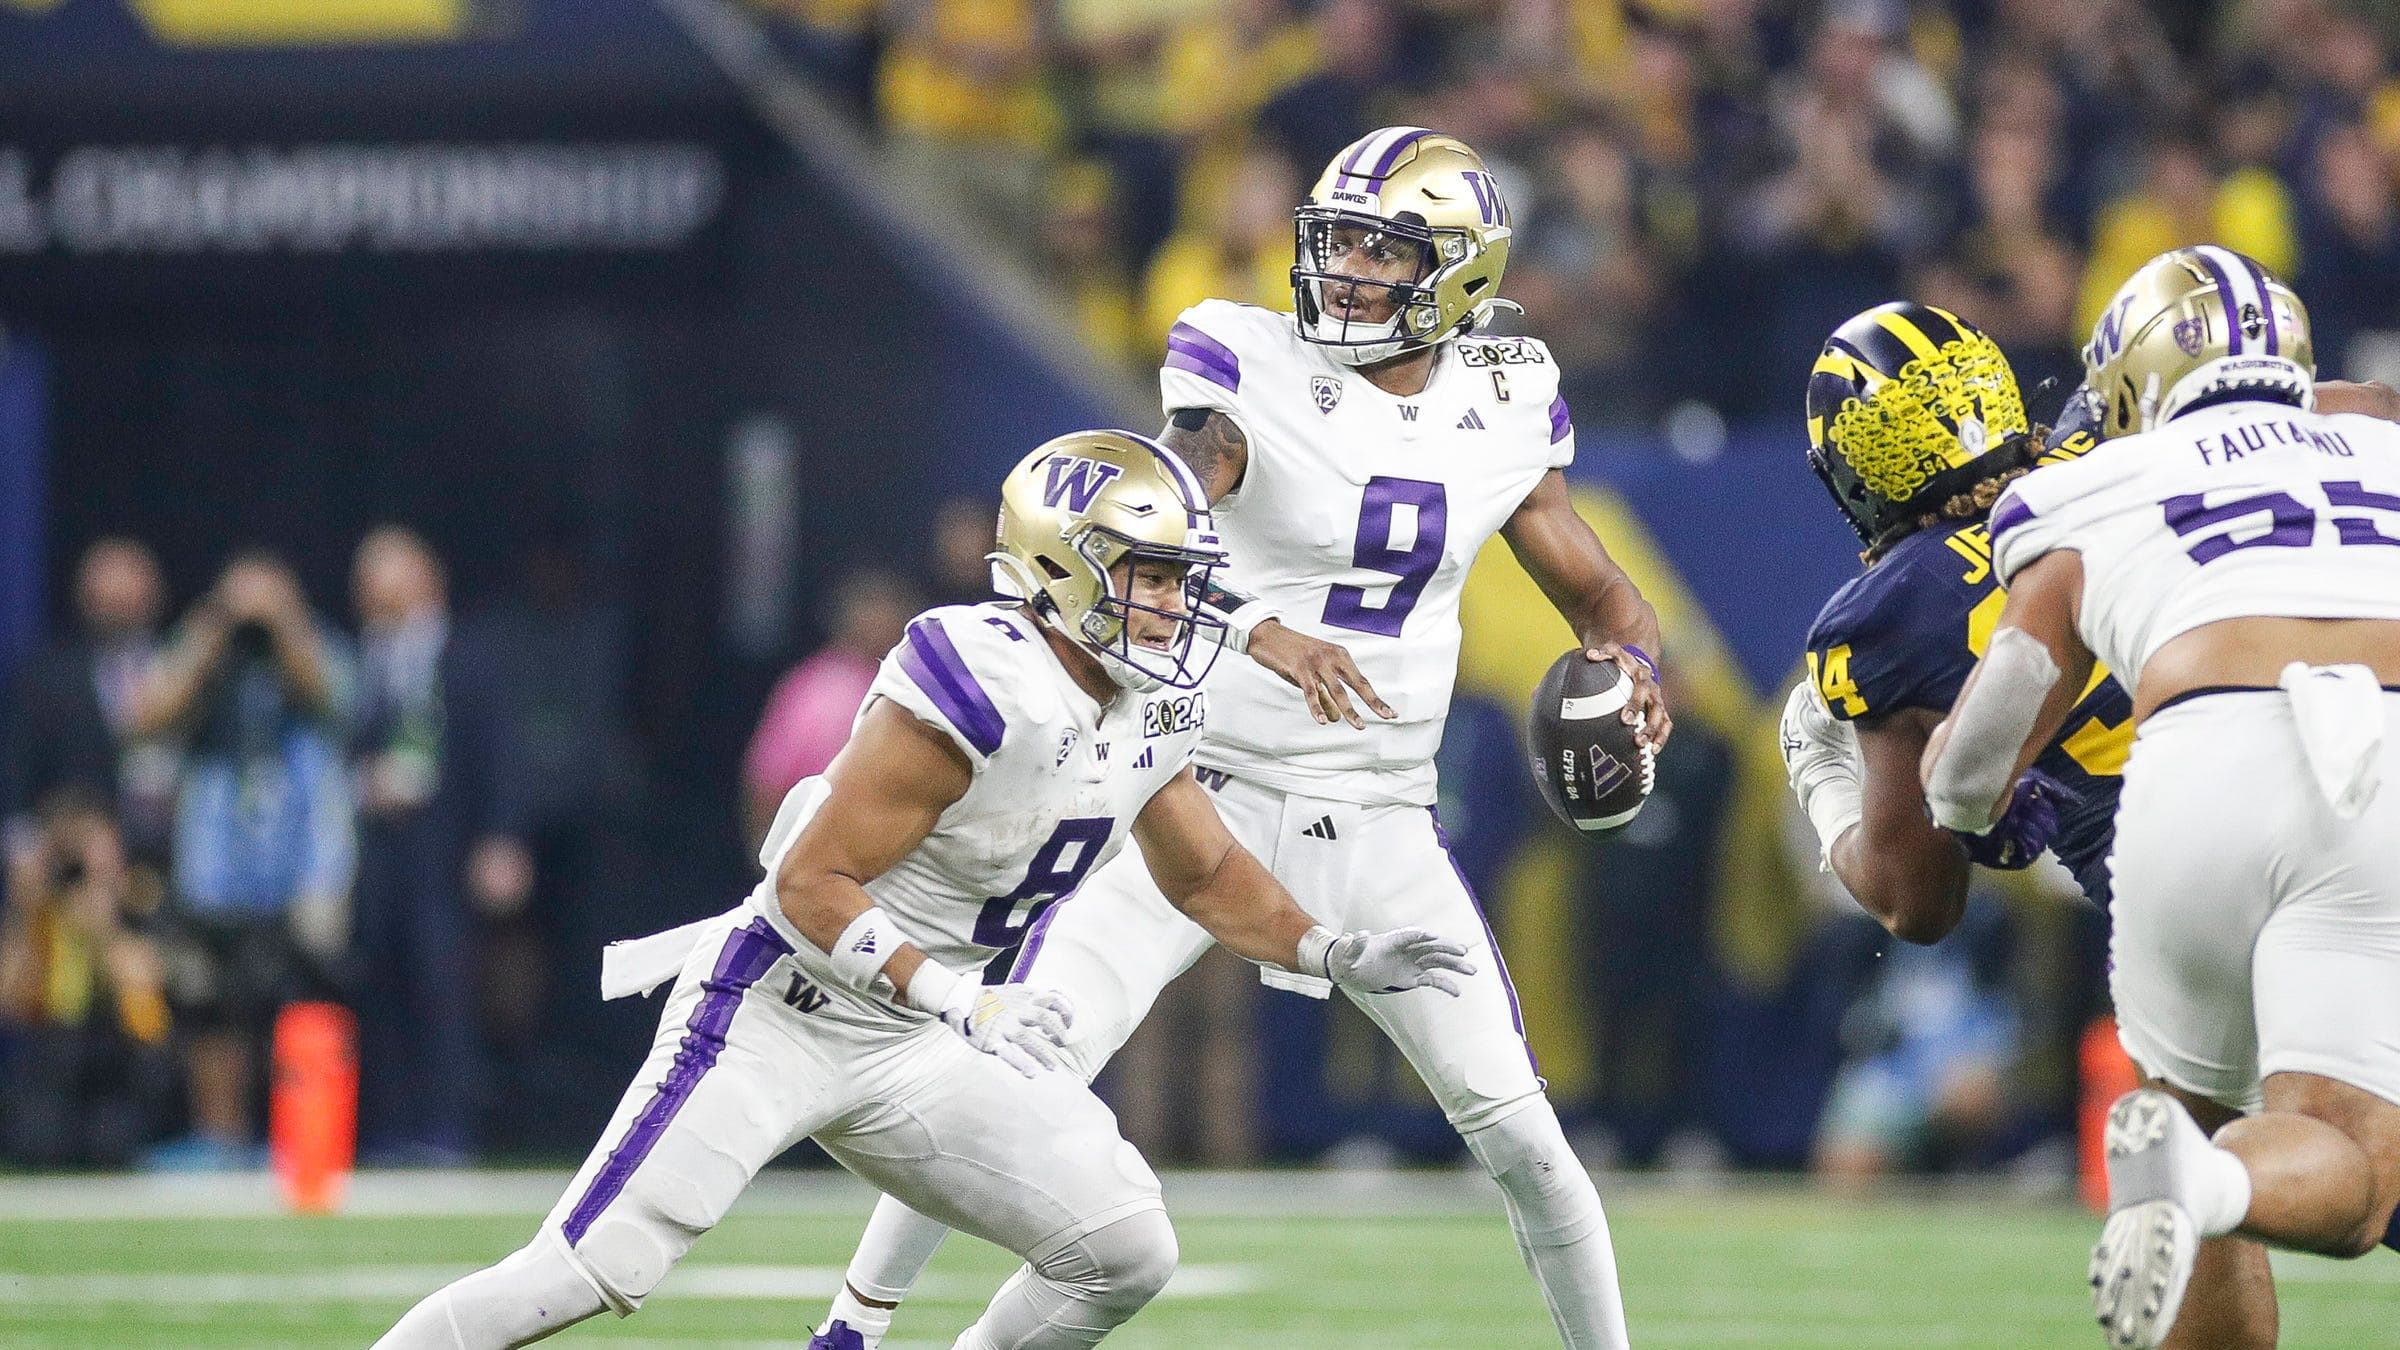 Washington quarterback Michael Penix Jr. looks to pass against Michigan during the first half of the national championship.